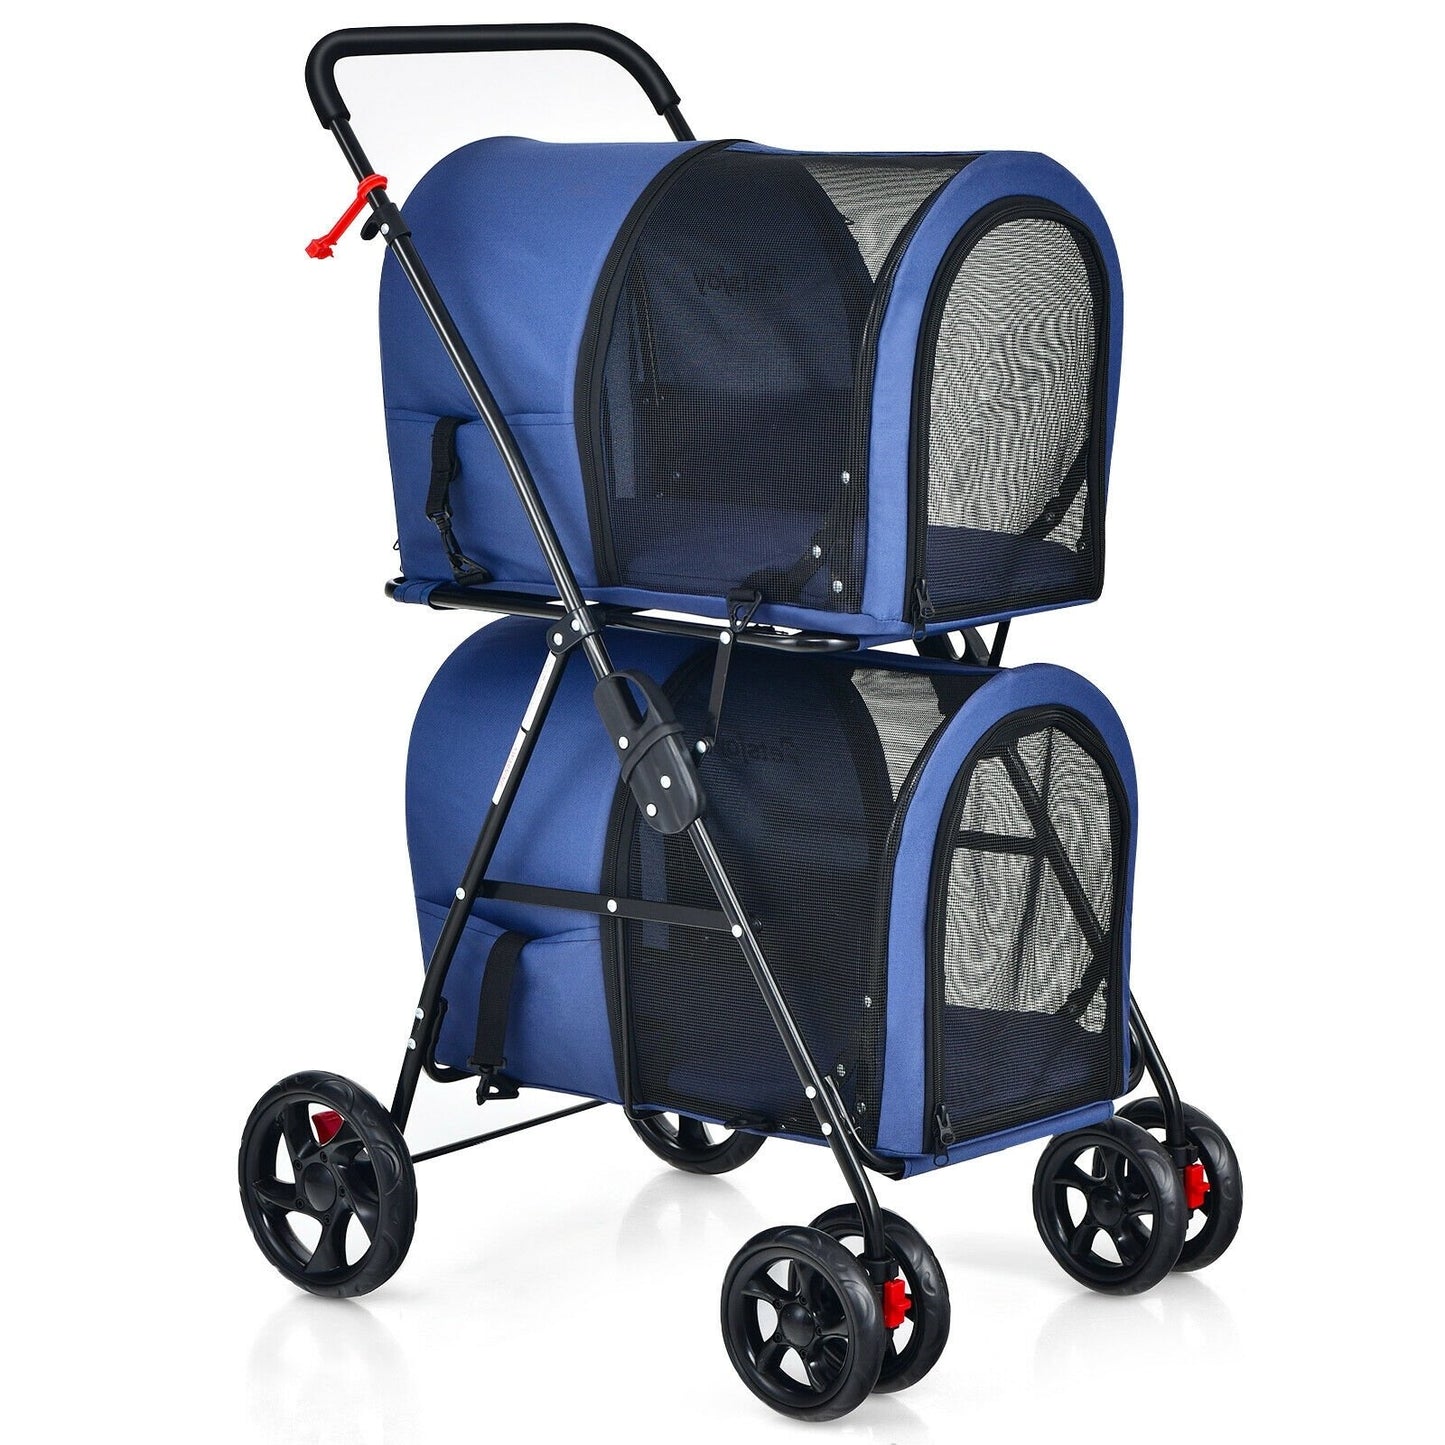 4-in-1 Double Pet Stroller with Detachable Carrier and Travel Carriage, Blue at Gallery Canada